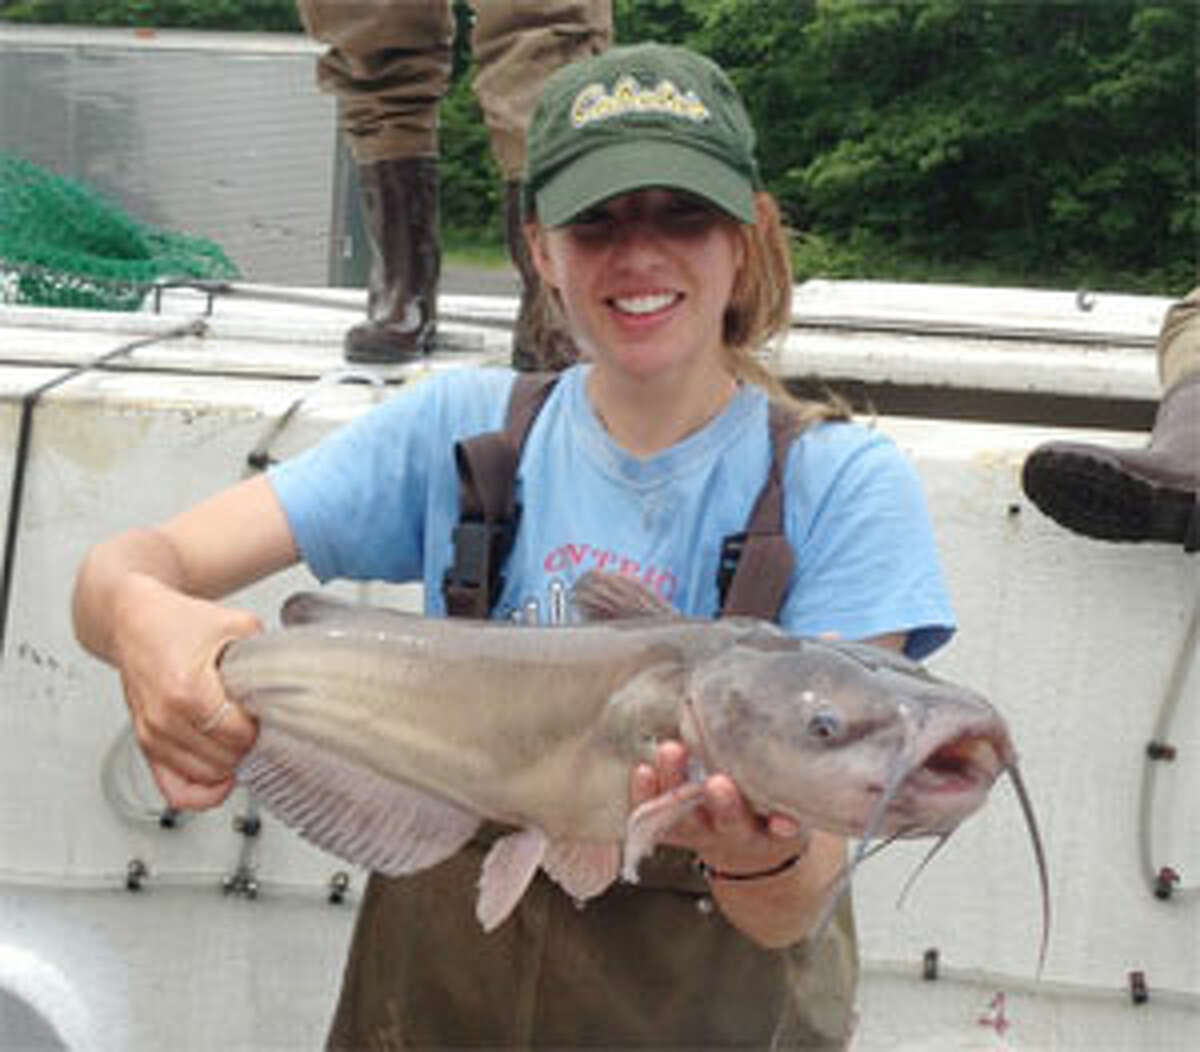 An angler holds up a catfish she caught in a Connecticut lake.